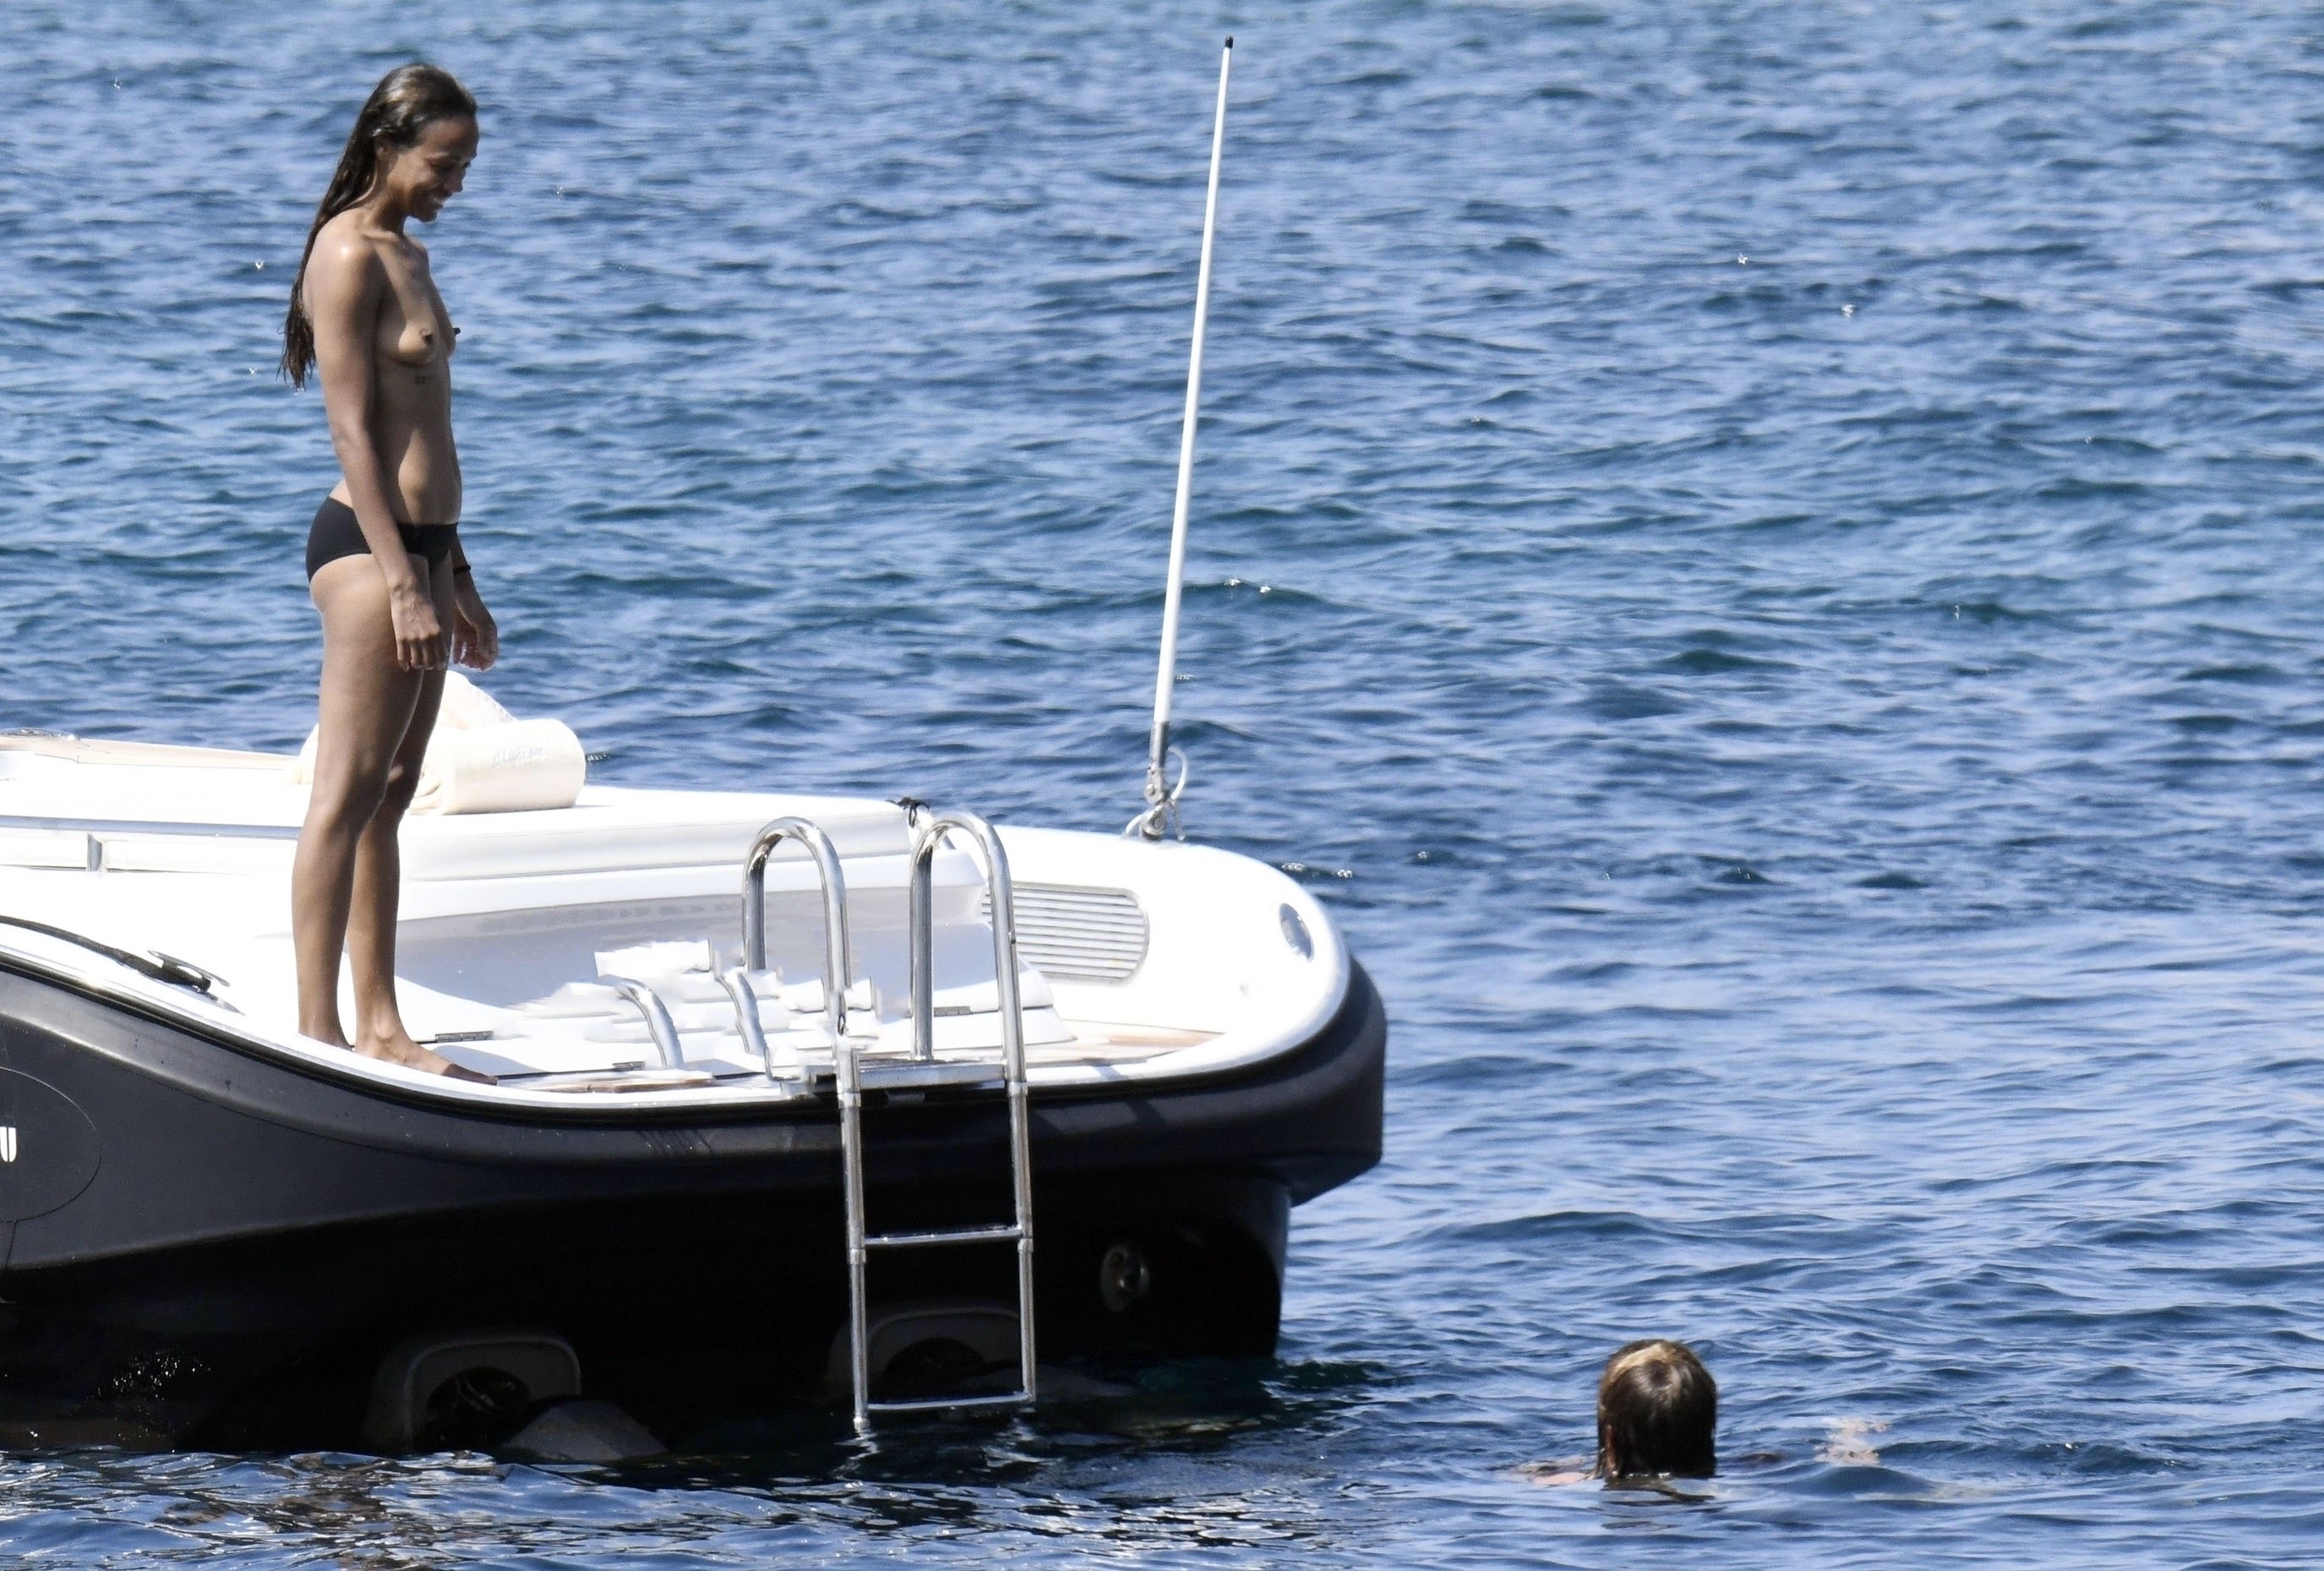 Photo © 2021 Backgrid UK/The Grosby GroupSardinia, Italy, Augsut 16, 2021PREMIUM EXCLUSIVESexy American Actress Zoe Saldana goes topless out in the hot Italian sunshine during her sun kissed holiday in Sardinia. Zoe along with her husband Marco Perego  (Foto: Backgrid UK/The Grosby Group)